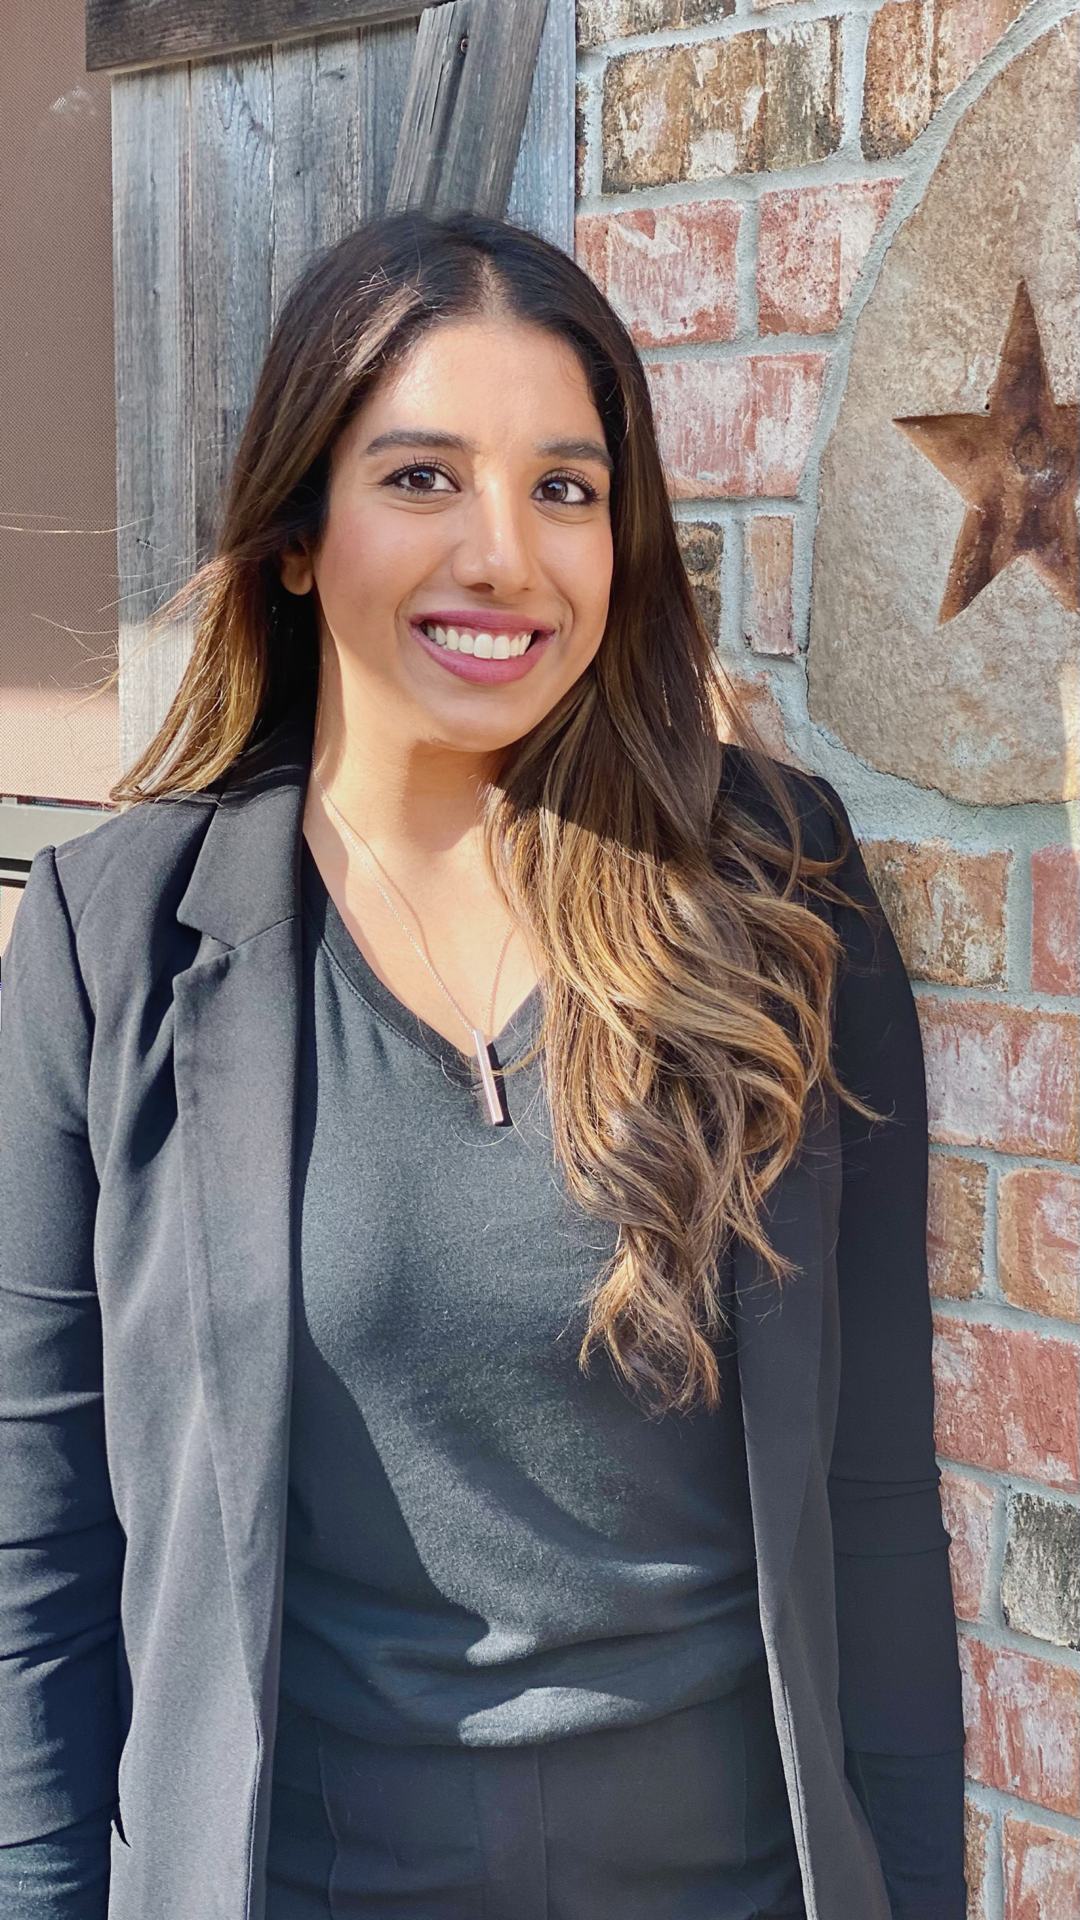 Image for COMMUNITY SPOTLIGHT: Tejal Patel named new Female Director of Asian American Hotel Owners Association